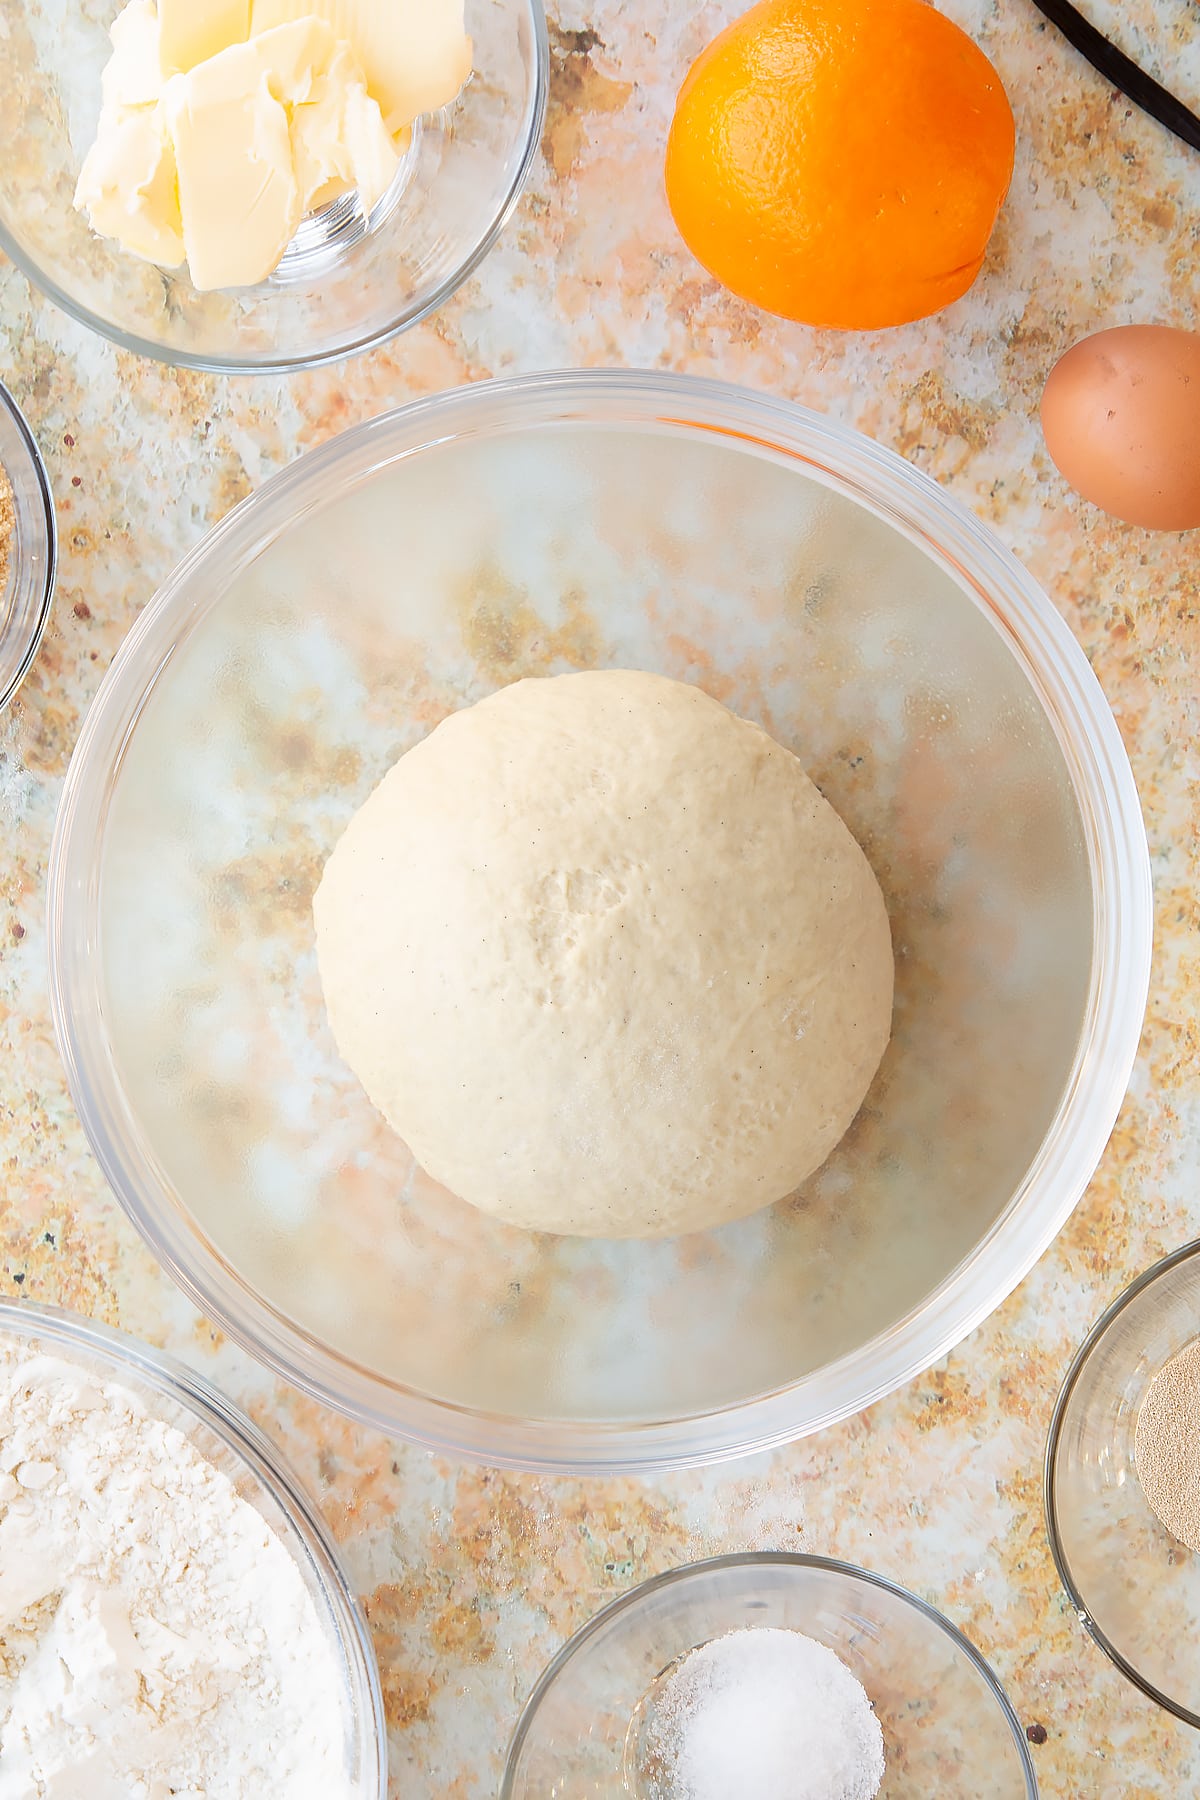 Overhead shot of the dough in the form of a ball used for the spiced fruit buns.